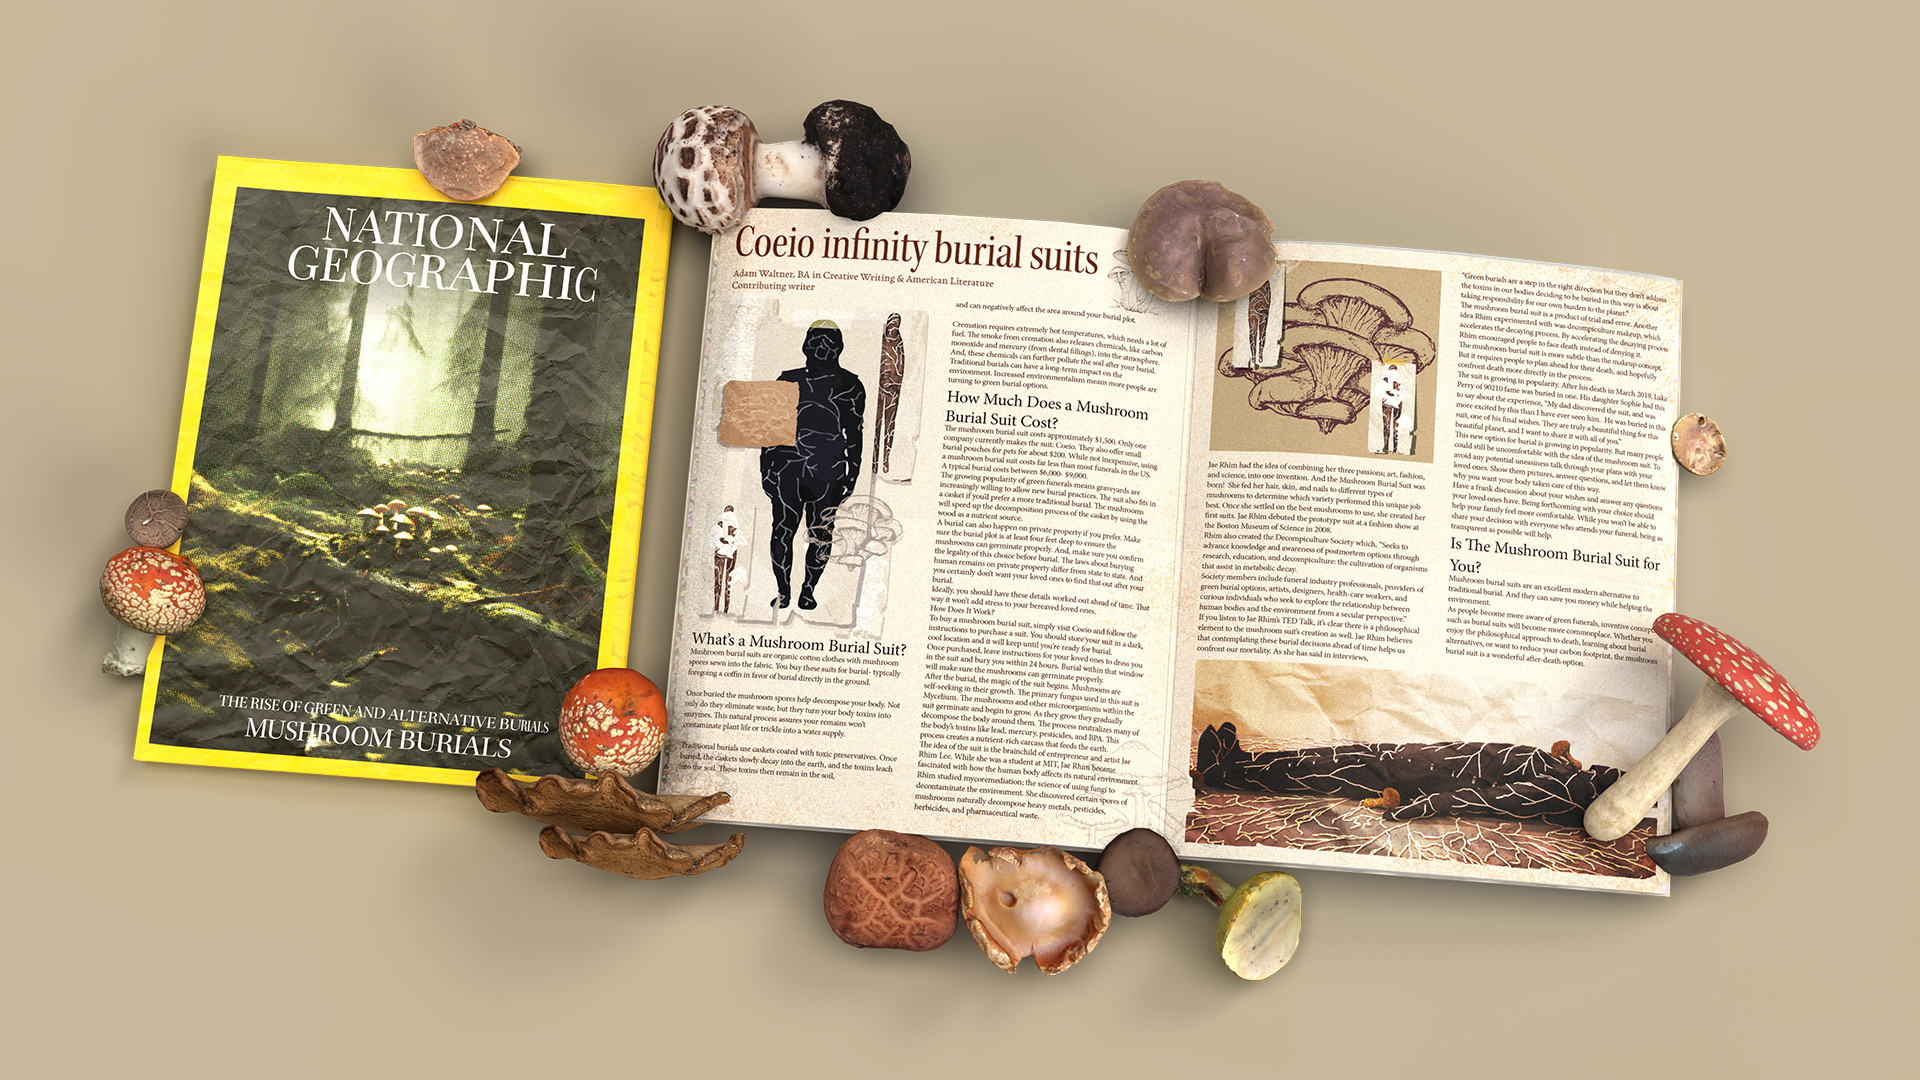 Coeio, Infinity Burial / Coeio, Infinity Burial: 11x17 inches, Magazine spread design, 2022, 2 page spread design for a mushroom burial service. Coeio was a company that offered an Alternative burial service that used mushrooms to break down bodies.